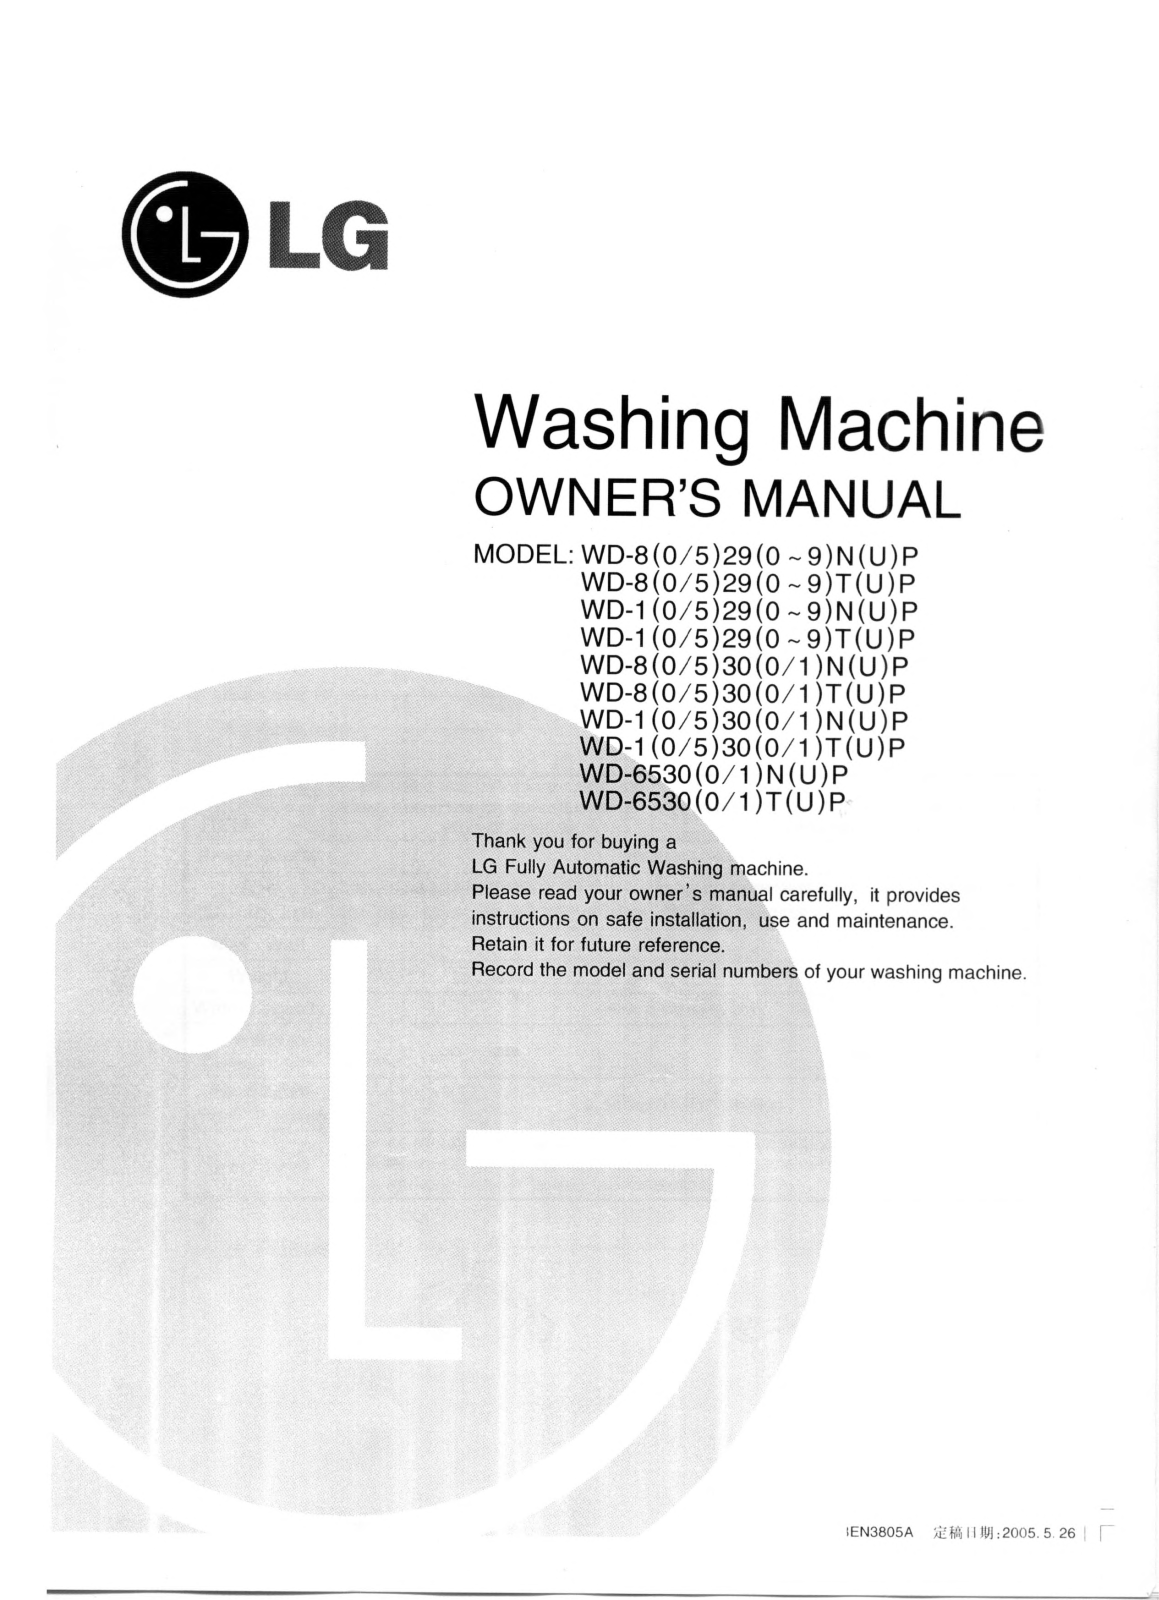 LG WD-80291TP, WD-85295NP, WD-85296NP, WD-85290NP, WD-85297NP Manual